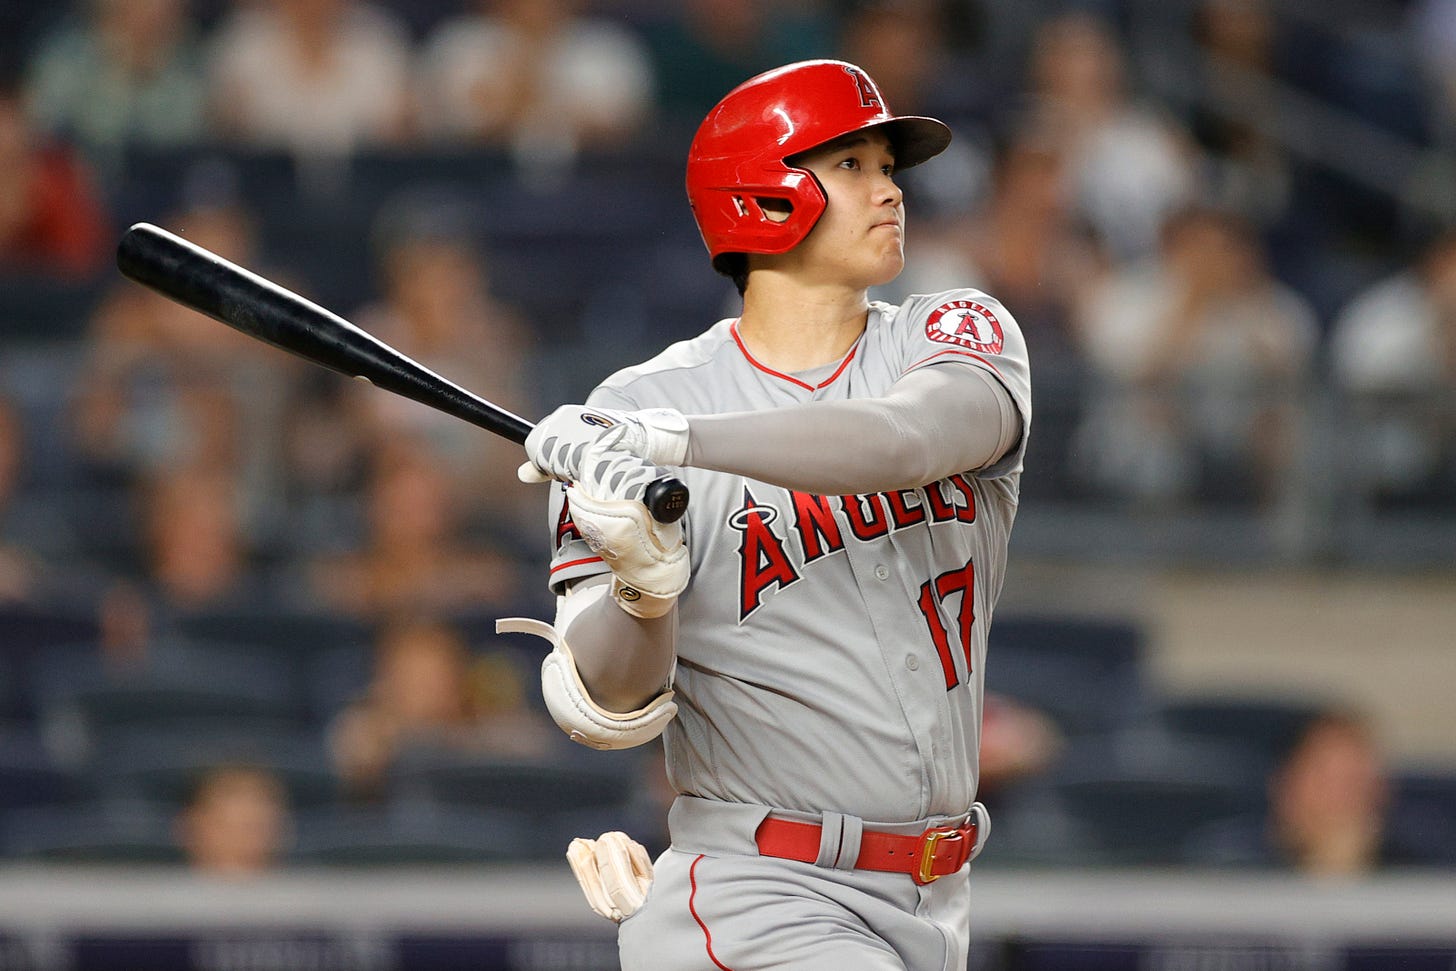 Interpreters help Shohei Ohtani, other stars succeed in MLB - Sports  Illustrated